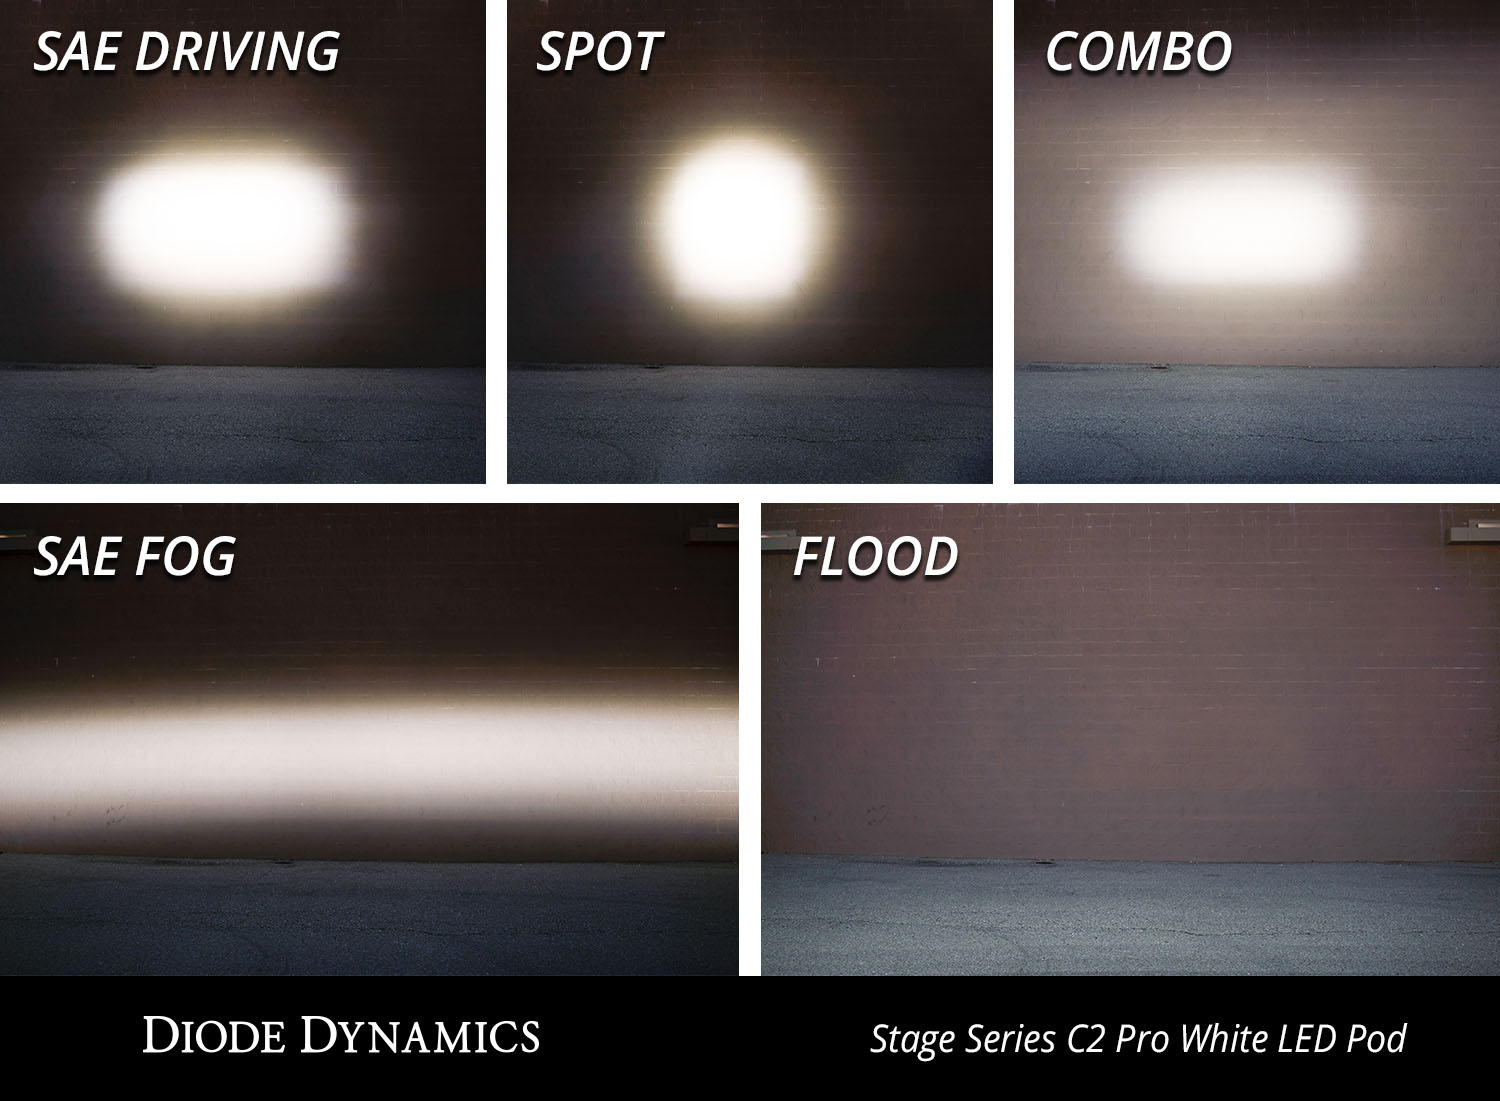 Diode Dynamics Stage Series 2 Inch LED Pod, Sport White Combo Standard RBL Each